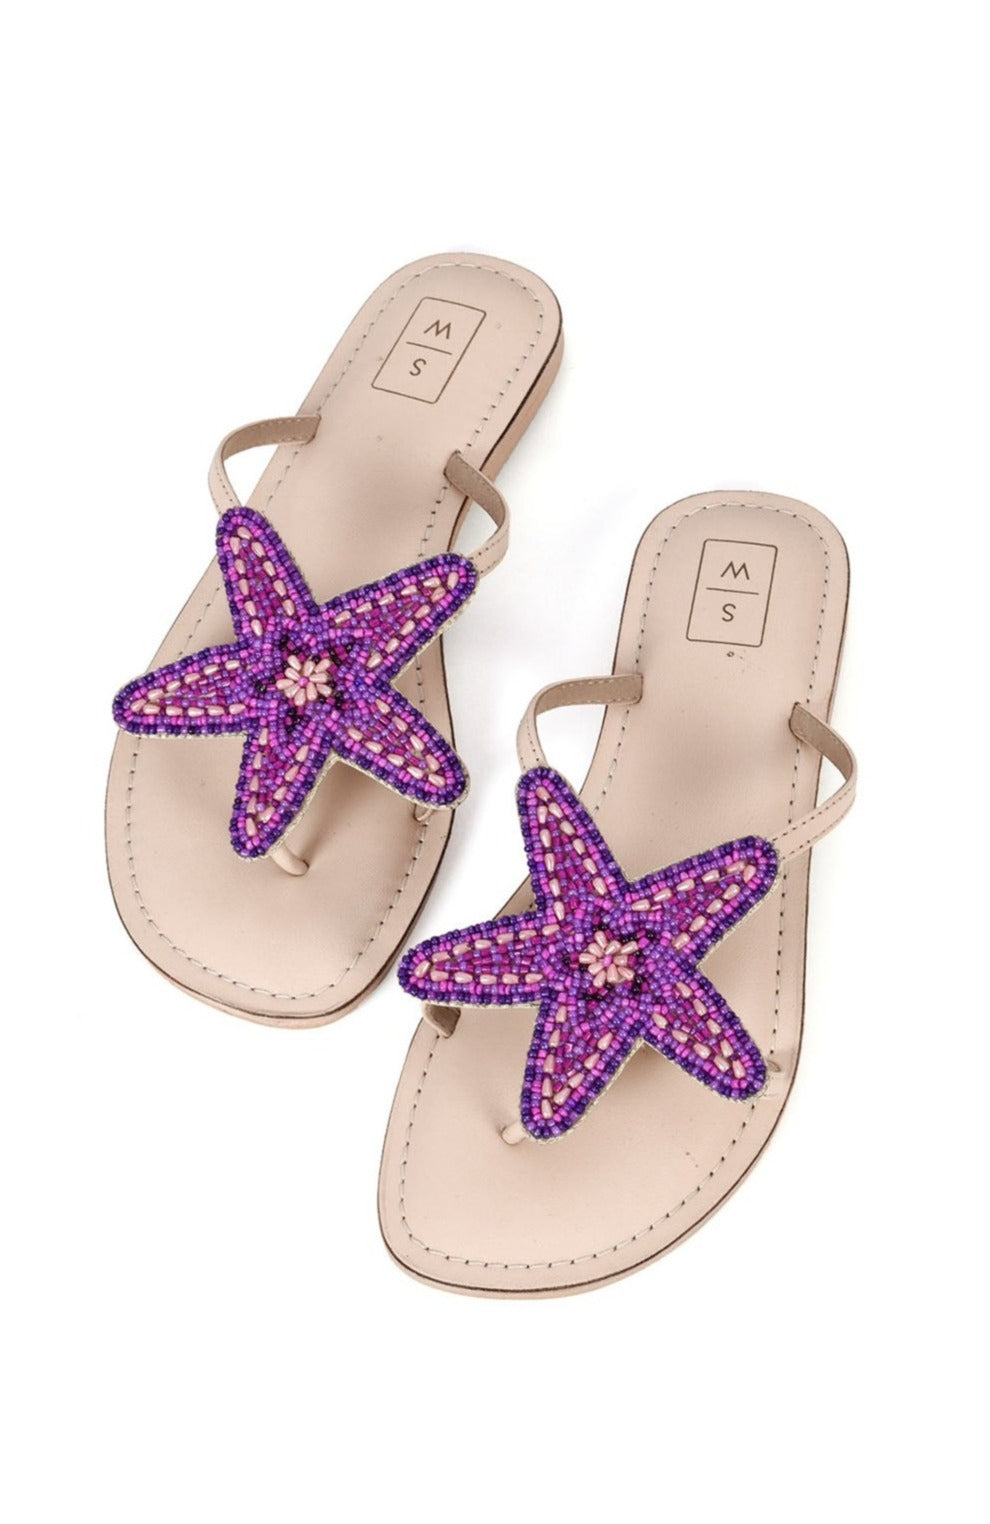 Lucy Violet Beaded Starfish Sandals